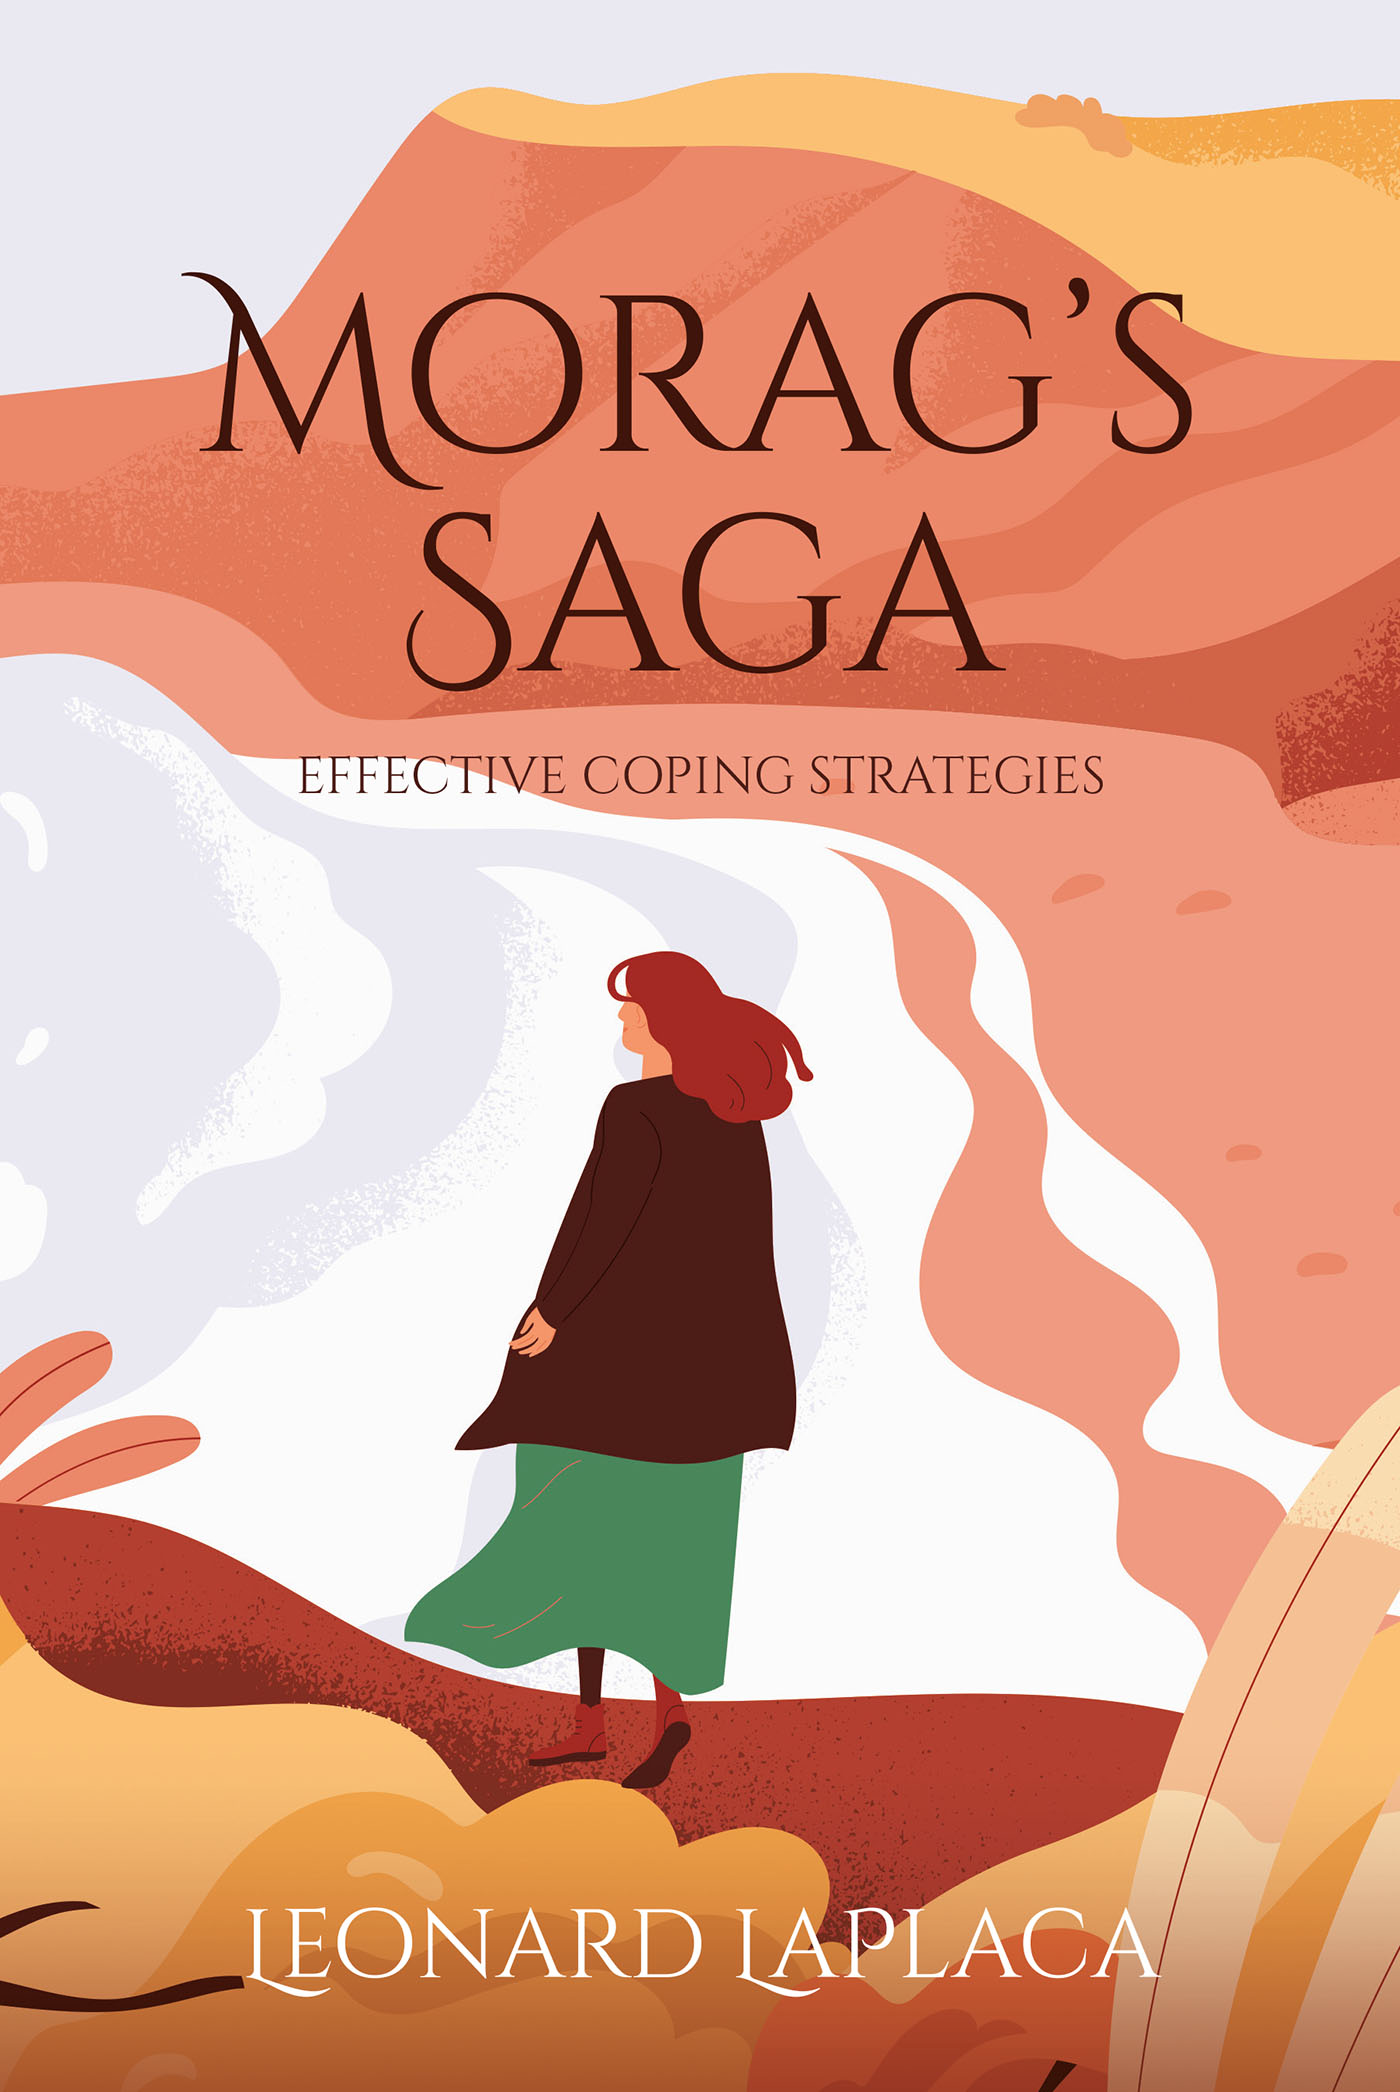 Leonard LaPlaca’s Newly Released “MORAG’S SAGA: Effective Coping Strategies” is a Unique and Enjoyable Collection of Positive Life Lessons